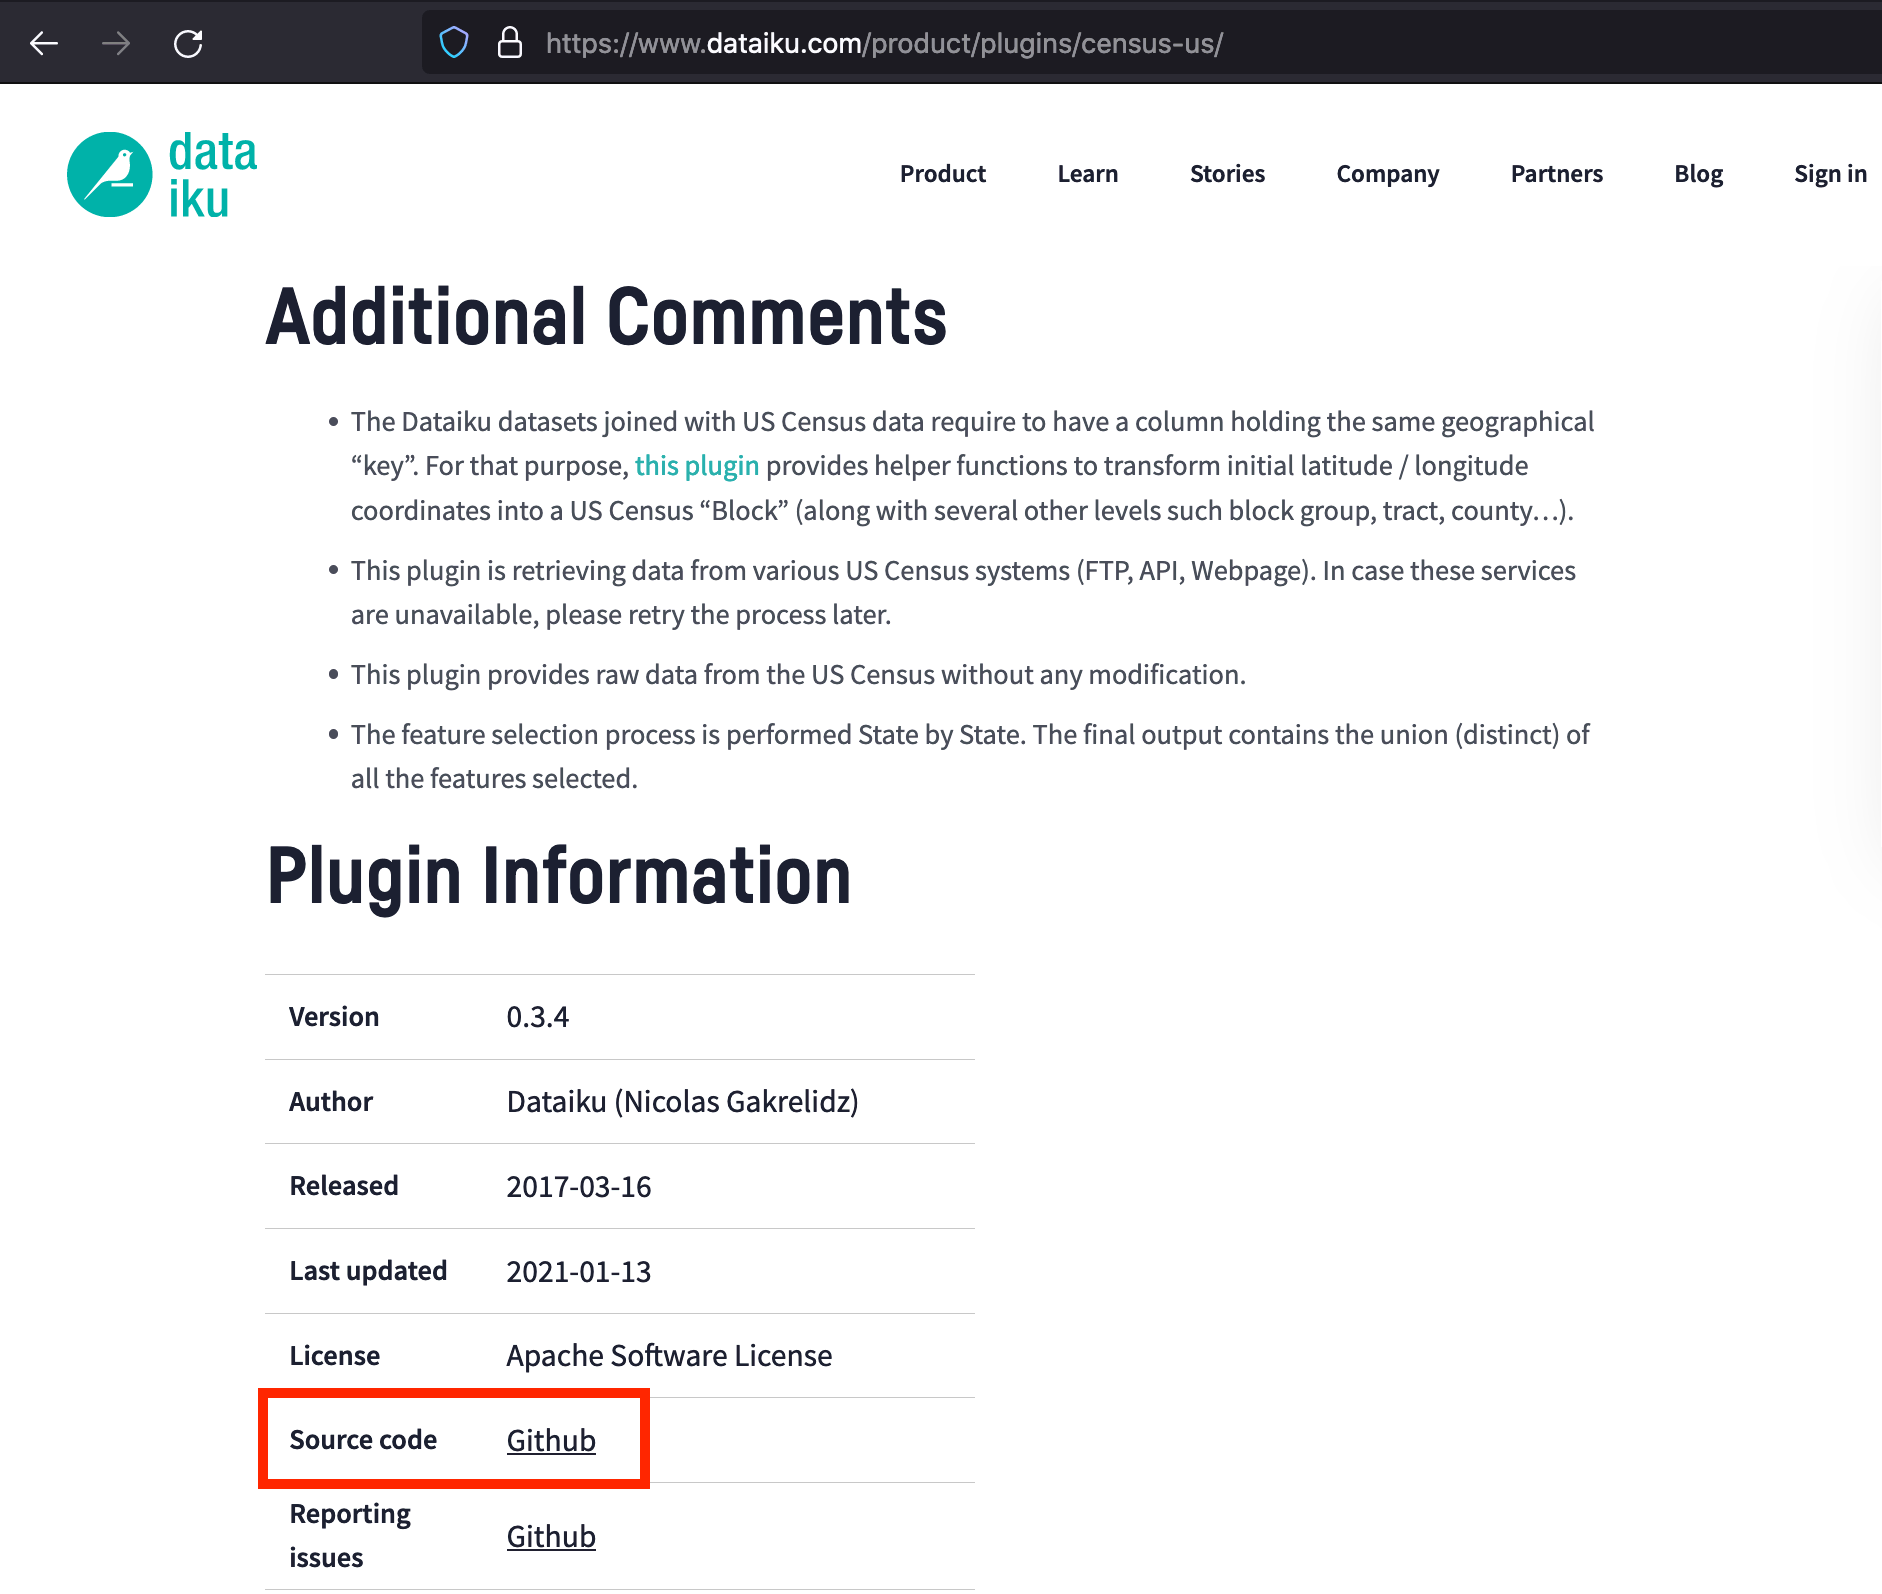 The plugin documentation page for the Census USA plugin lists the plugin's key capabilities and how to use them.